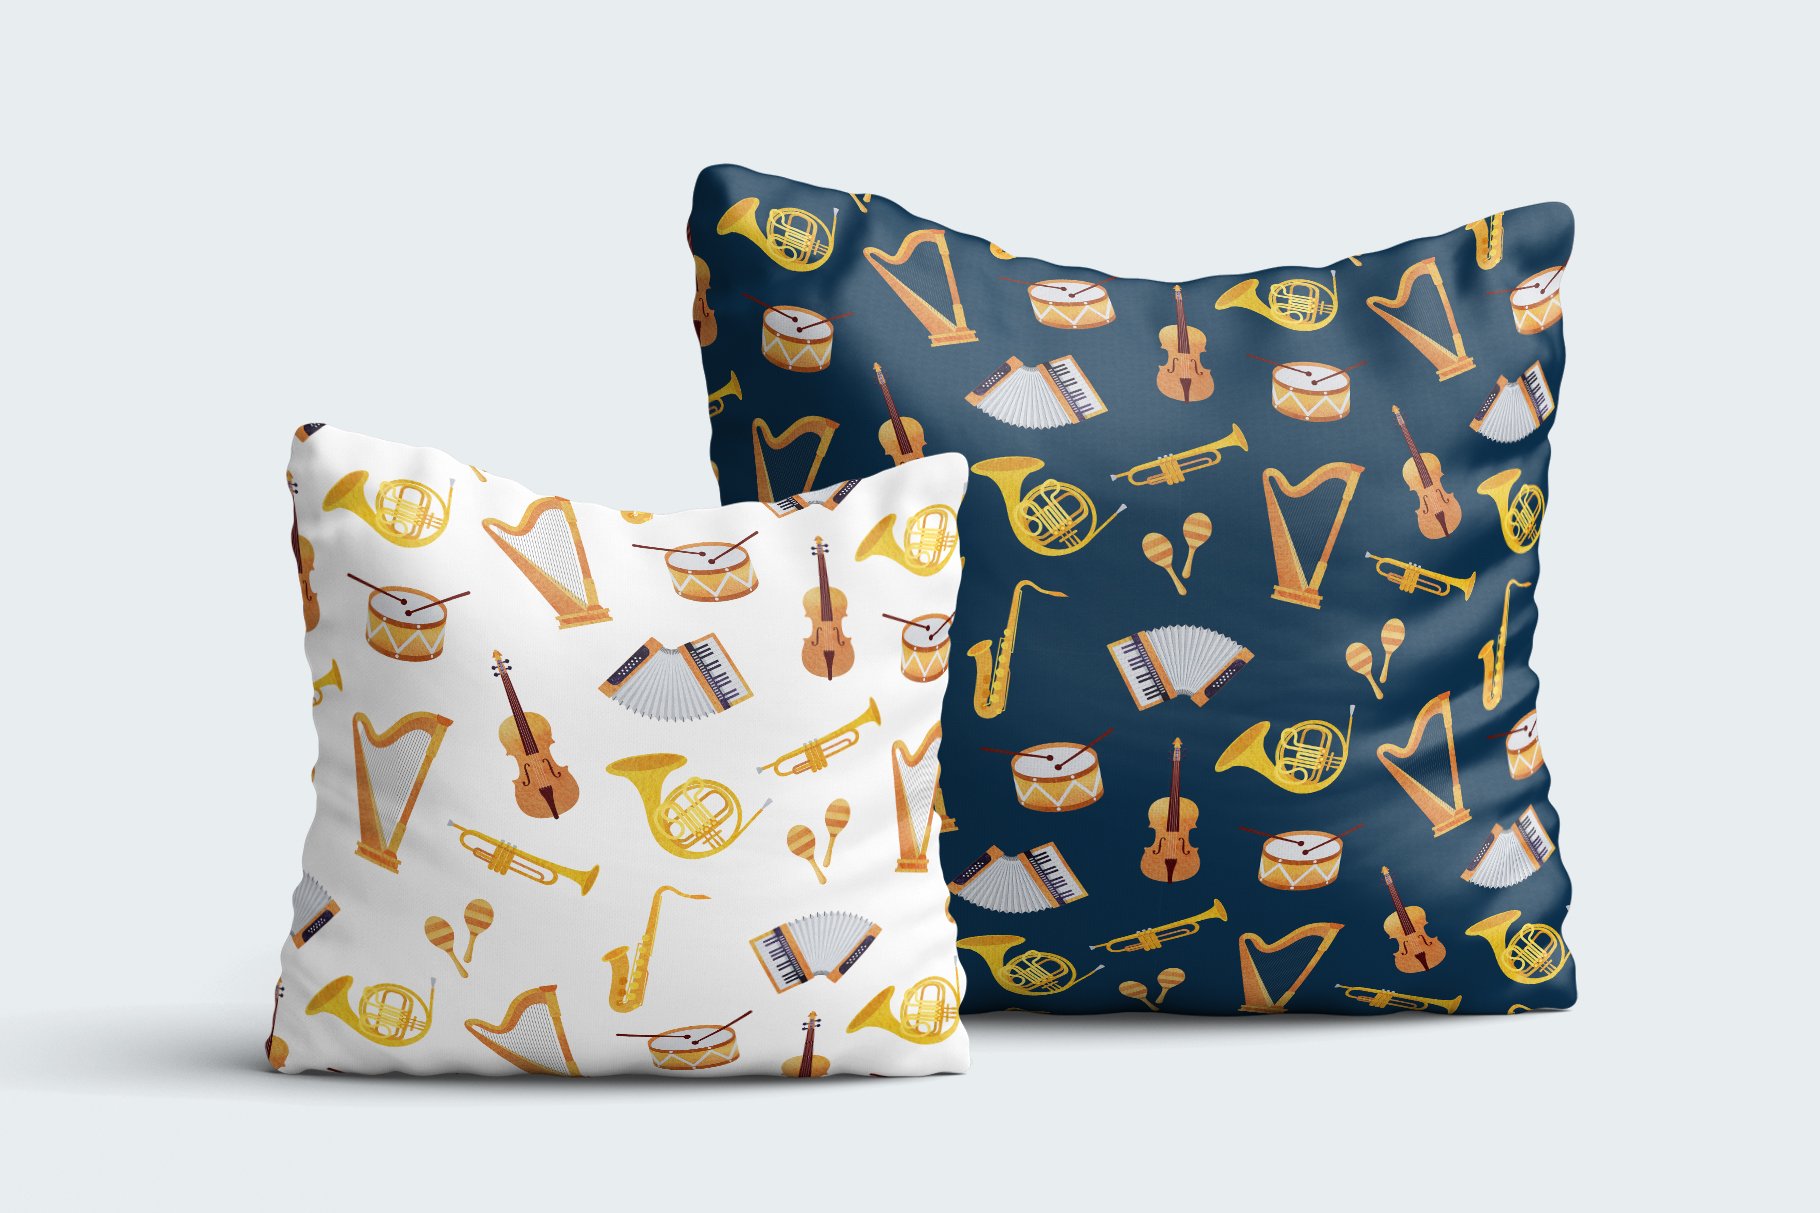 Decorate pillows with the music instruments print.